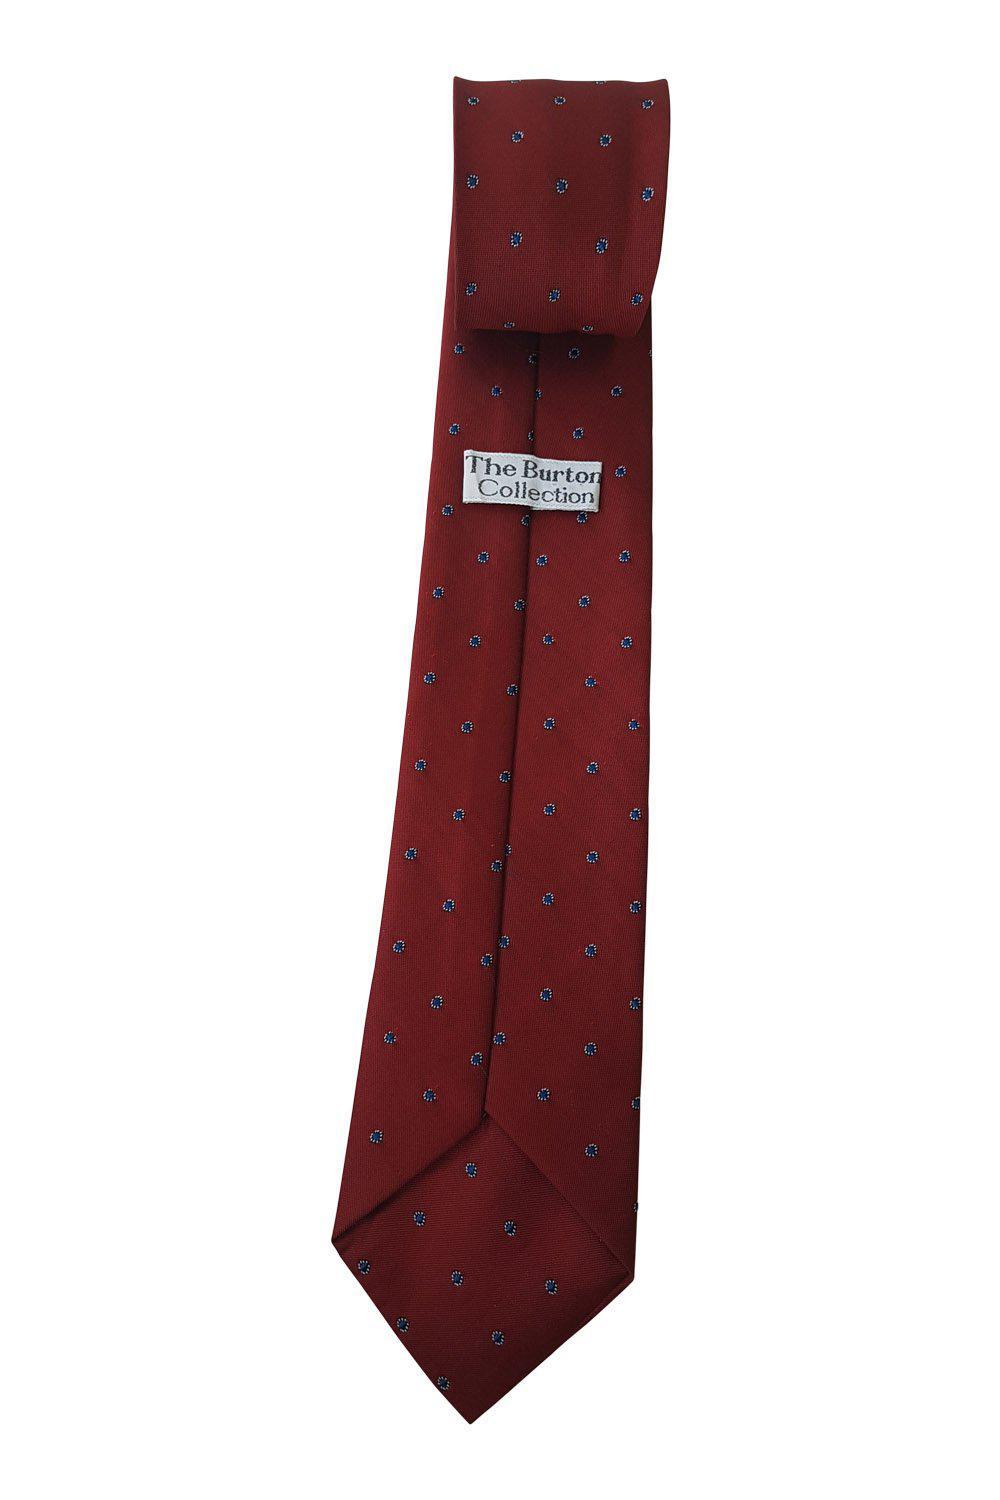 THE BURTON COLLECTION Metallic Red Tie With Blue Dotted Repeat (57")-The Burton Collection-The Freperie